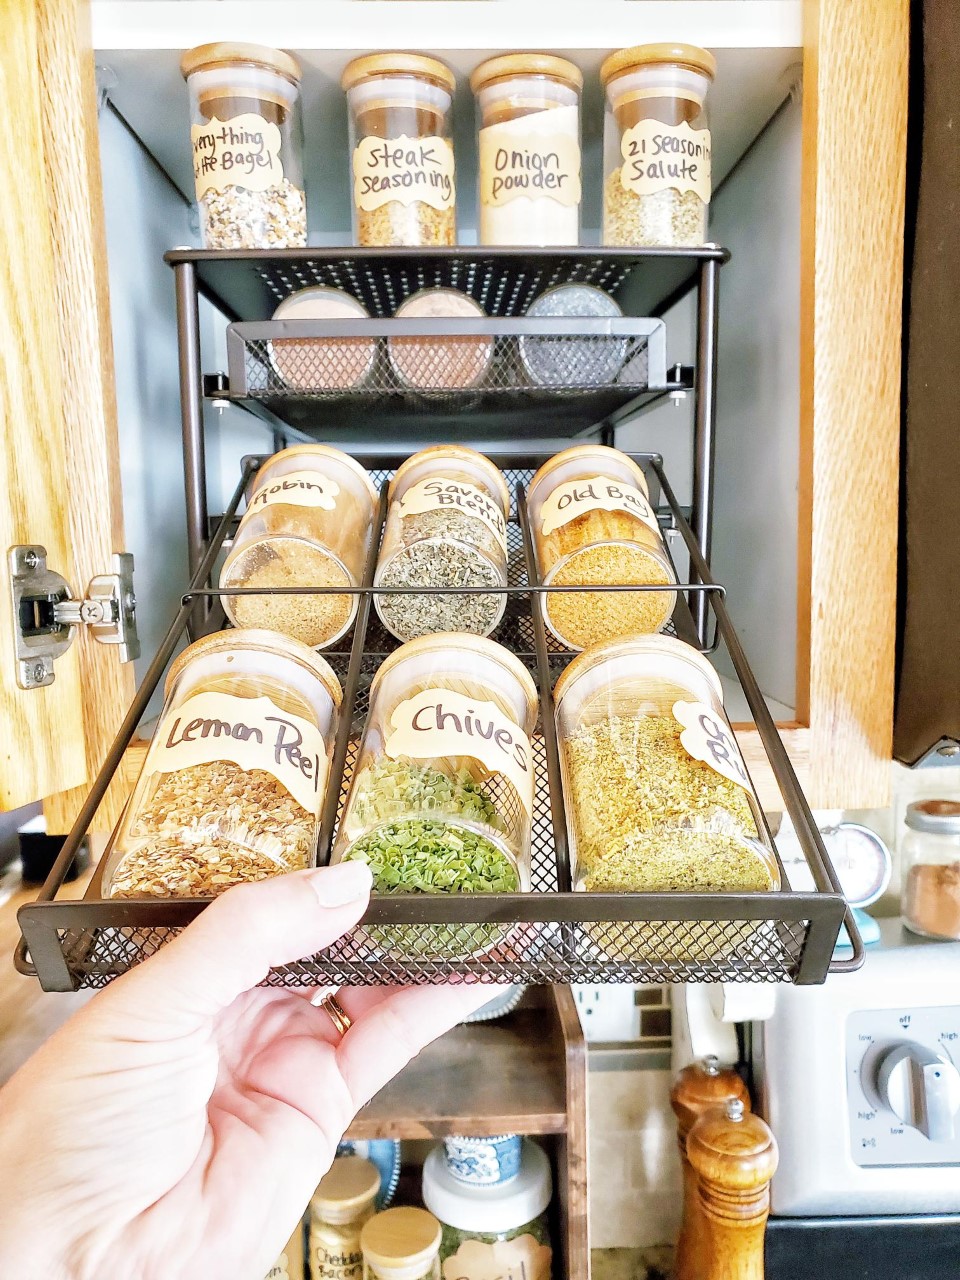 Get those spices organized for easy cooking.